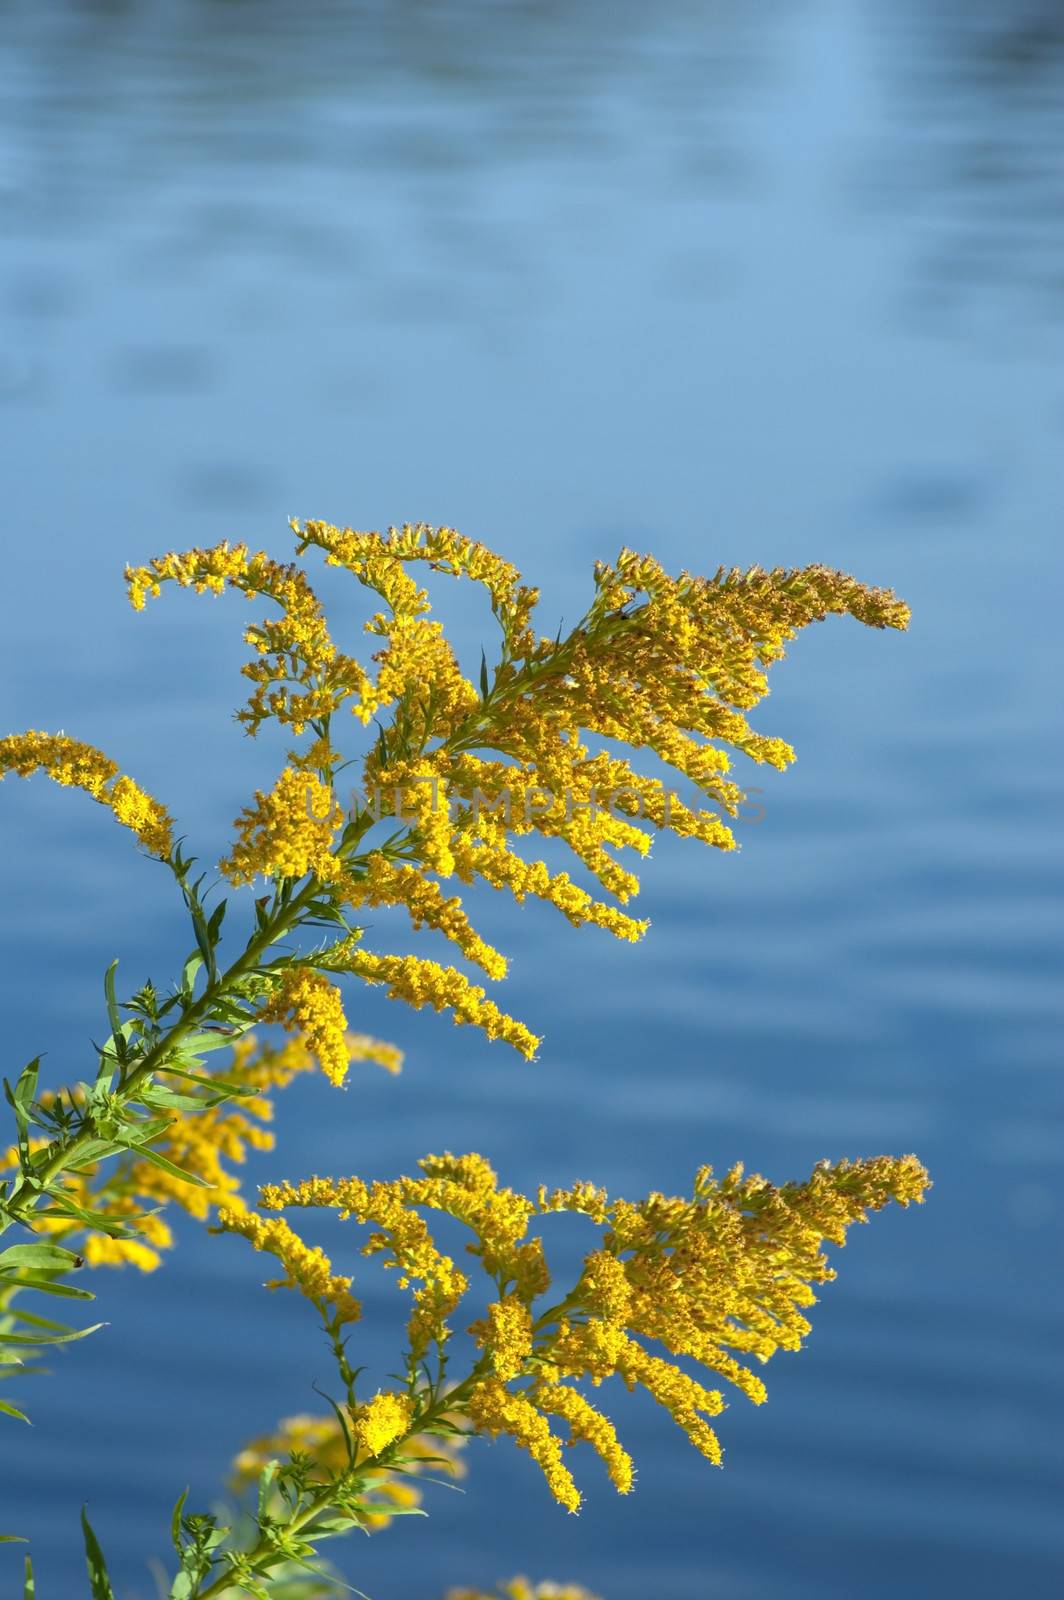 Goldenrod by PavelS